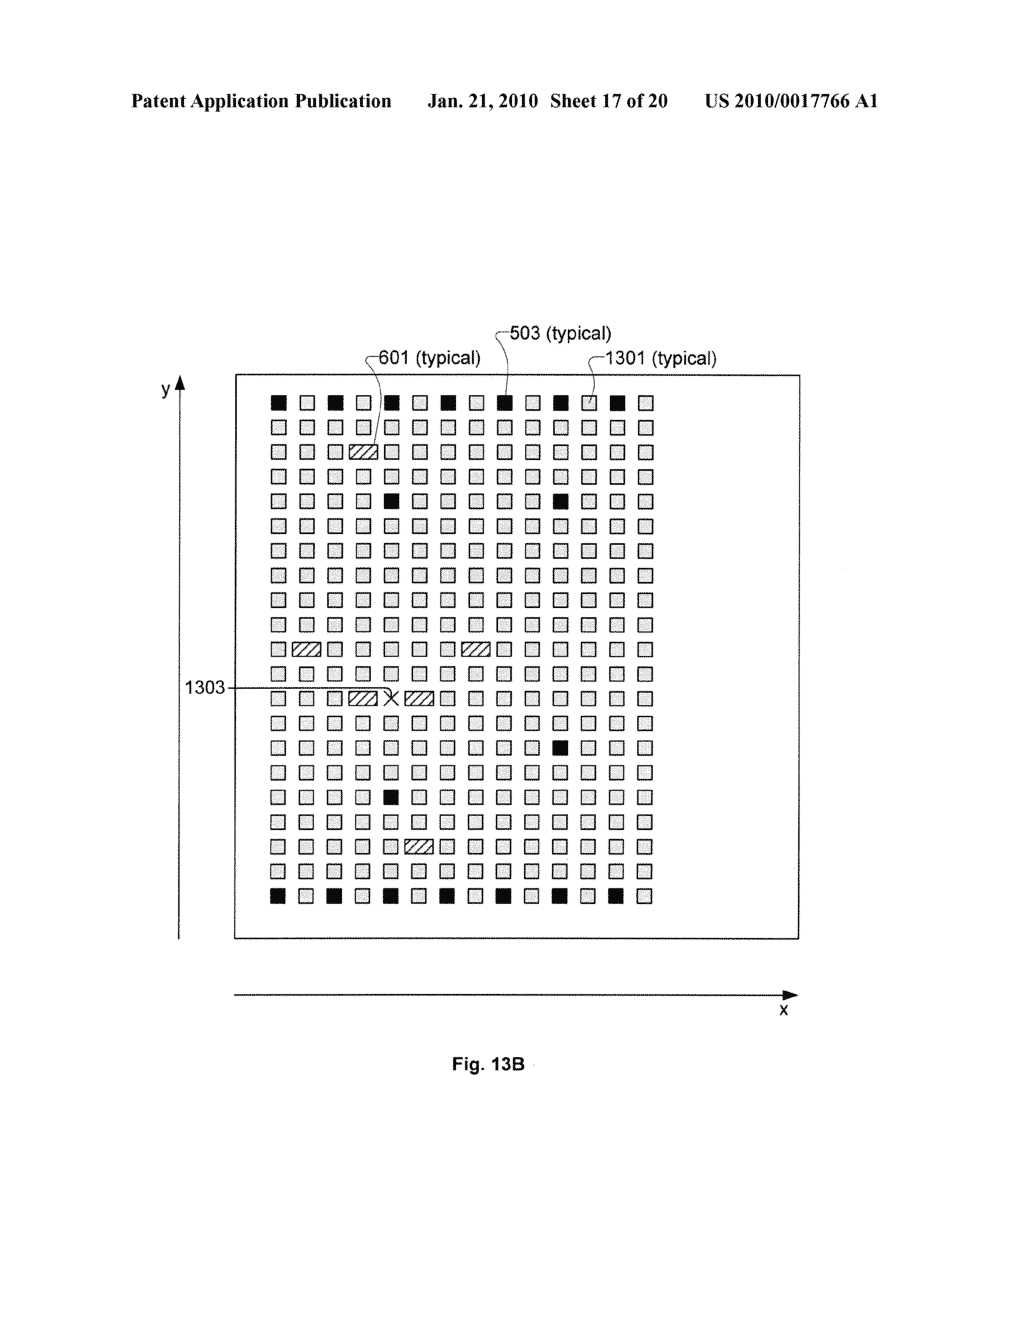 Semiconductor Device Layout Including Cell Layout Having Restricted Gate Electrode Level Layout with Linear Shaped Gate Electrode Layout Features Defined with Minimum End-to-End Spacing and At Least Eight Transistors - diagram, schematic, and image 18